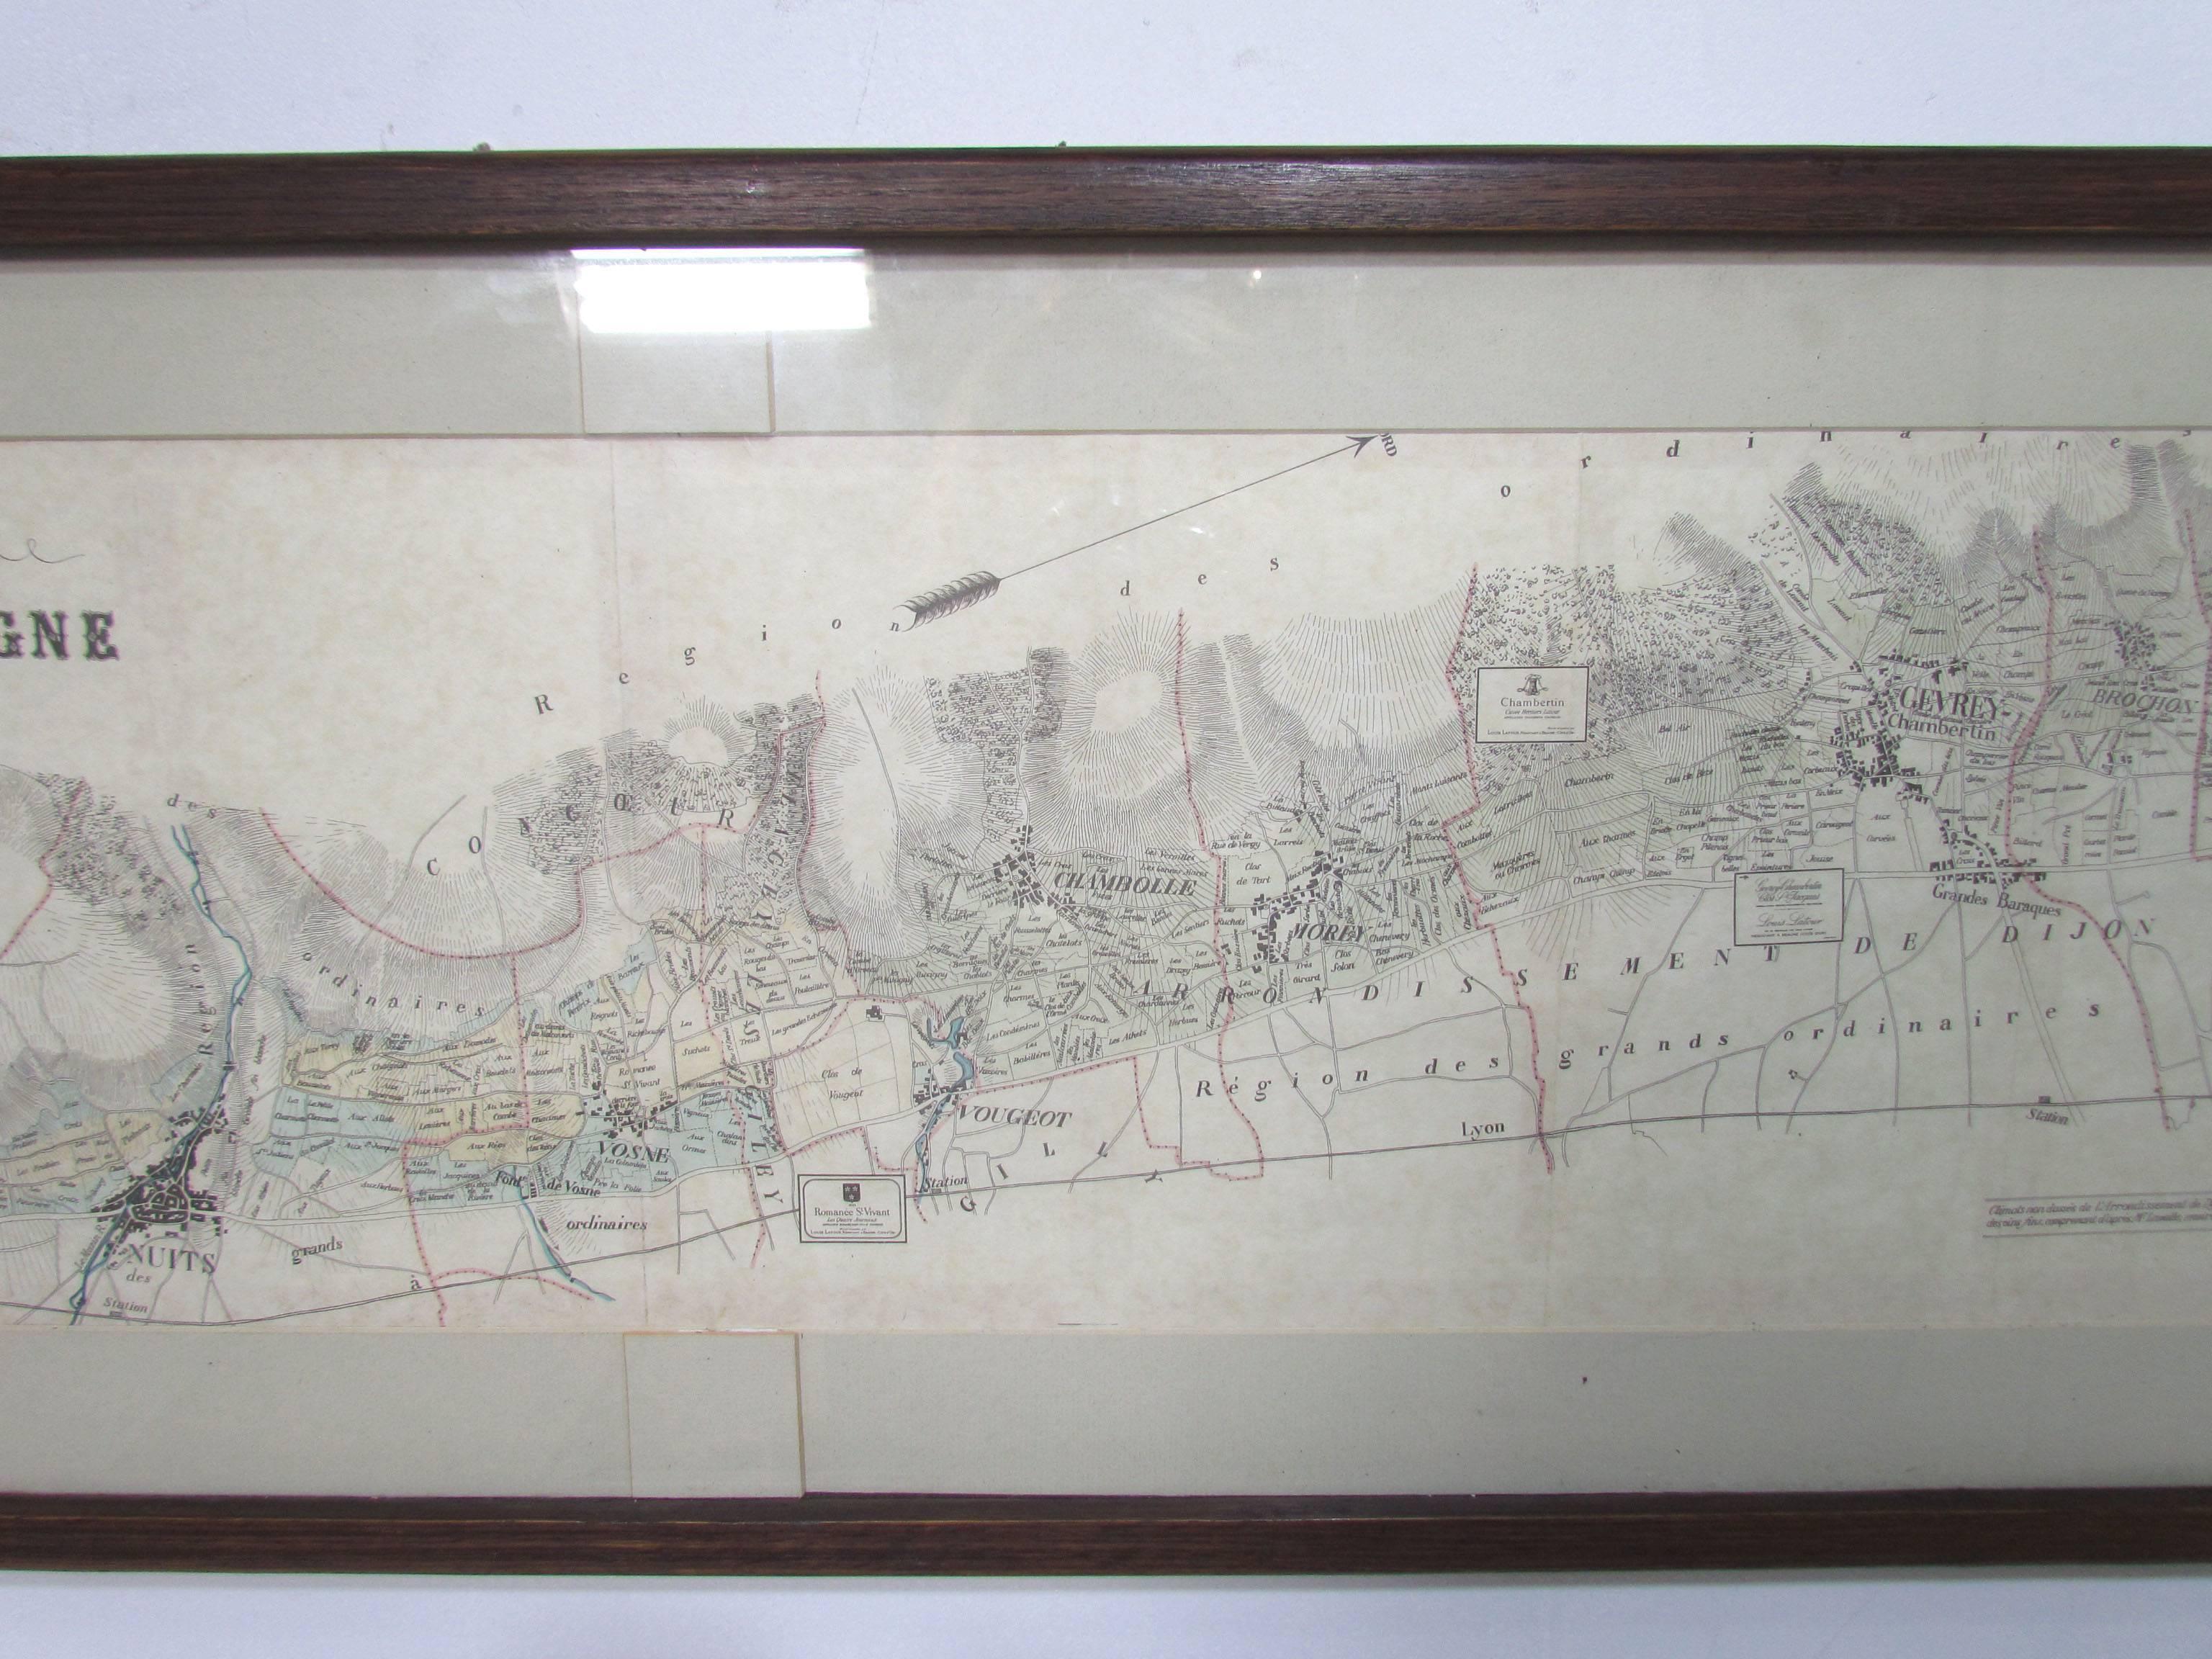 French Panoramic Antique Lithographic Map for Louis Latour, Burgundy France Region